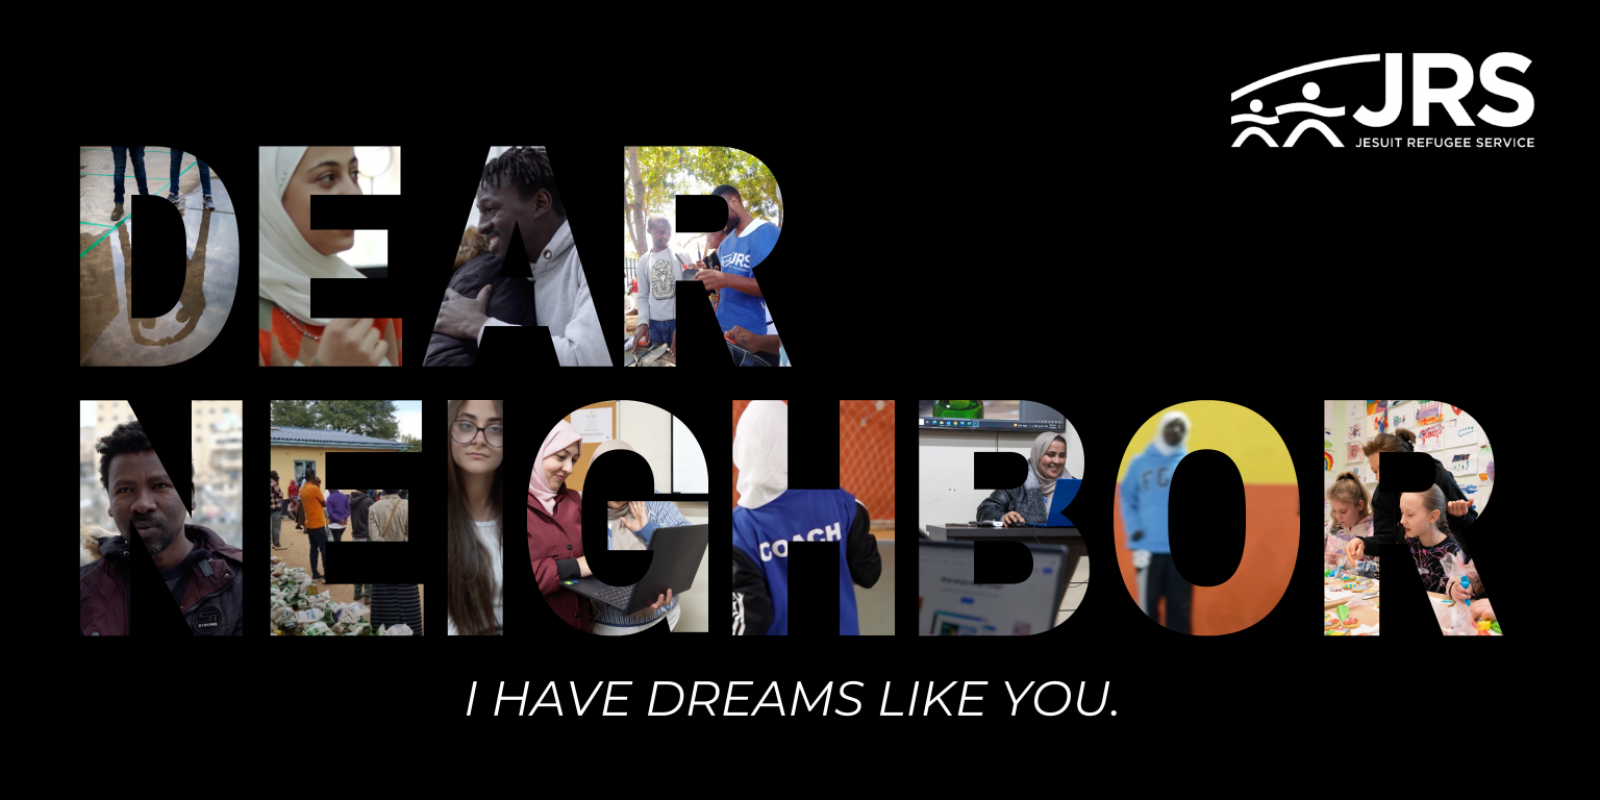 “Dear Neighbour” is a documentary series that tells the stories of hope, perseverance and humanity of refugees in the Middle East region.